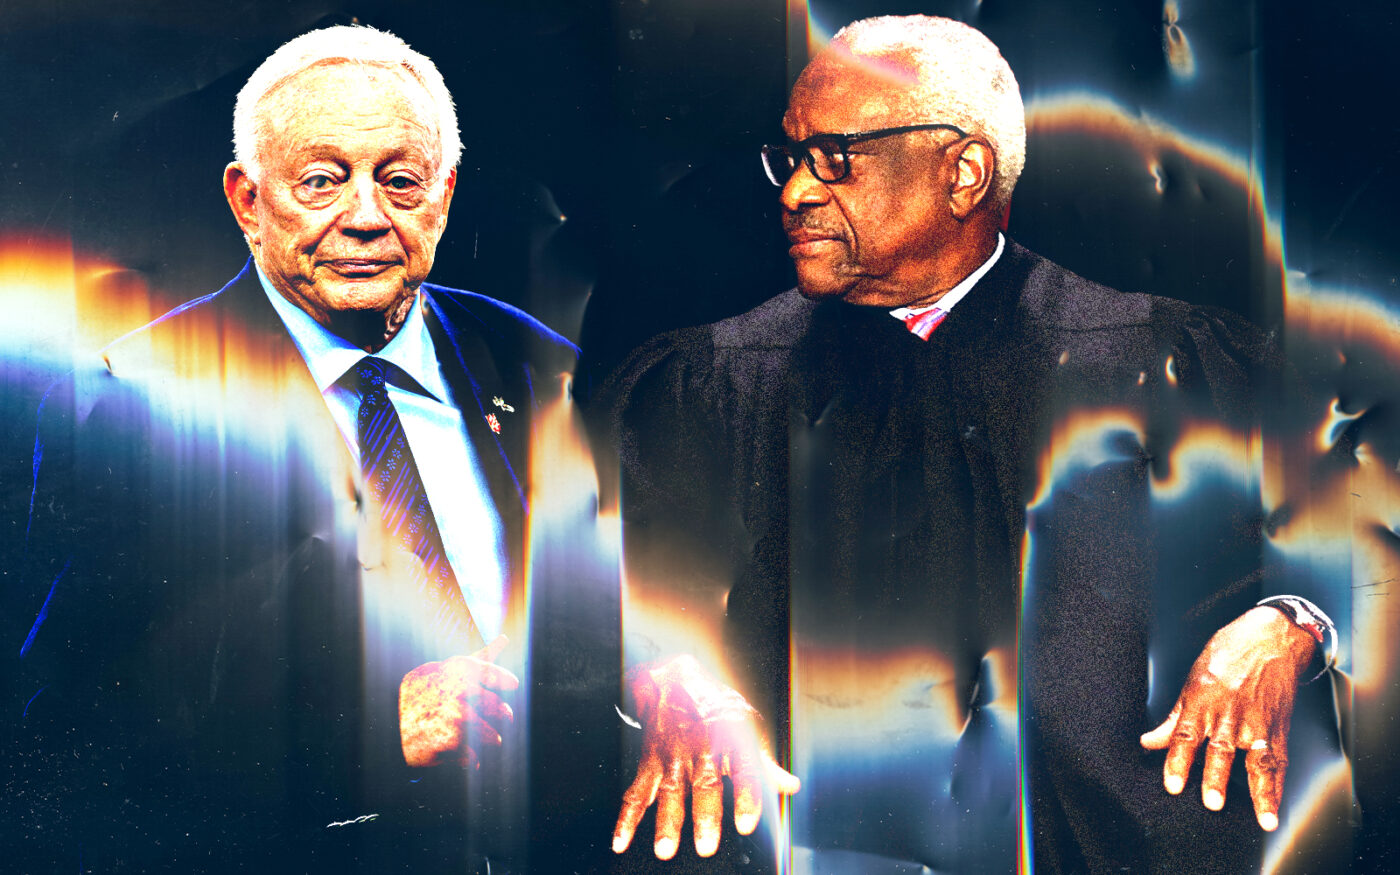 From left: Jerry Jones and Clarence Thomas (Photo Illustration by Steven Dilakian for The Real Deal with Getty)